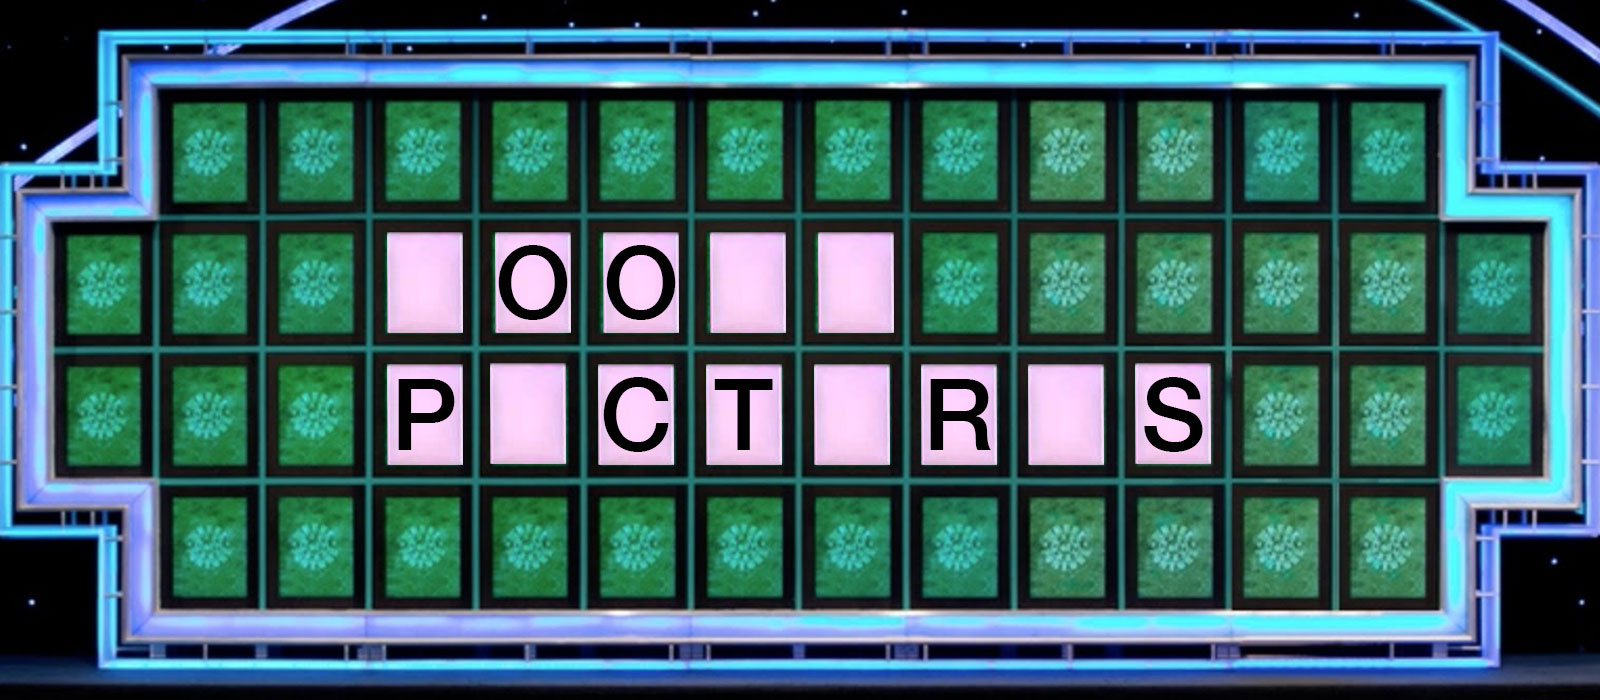 Can You Solve These Wheel of Fortune Puzzles? 1414